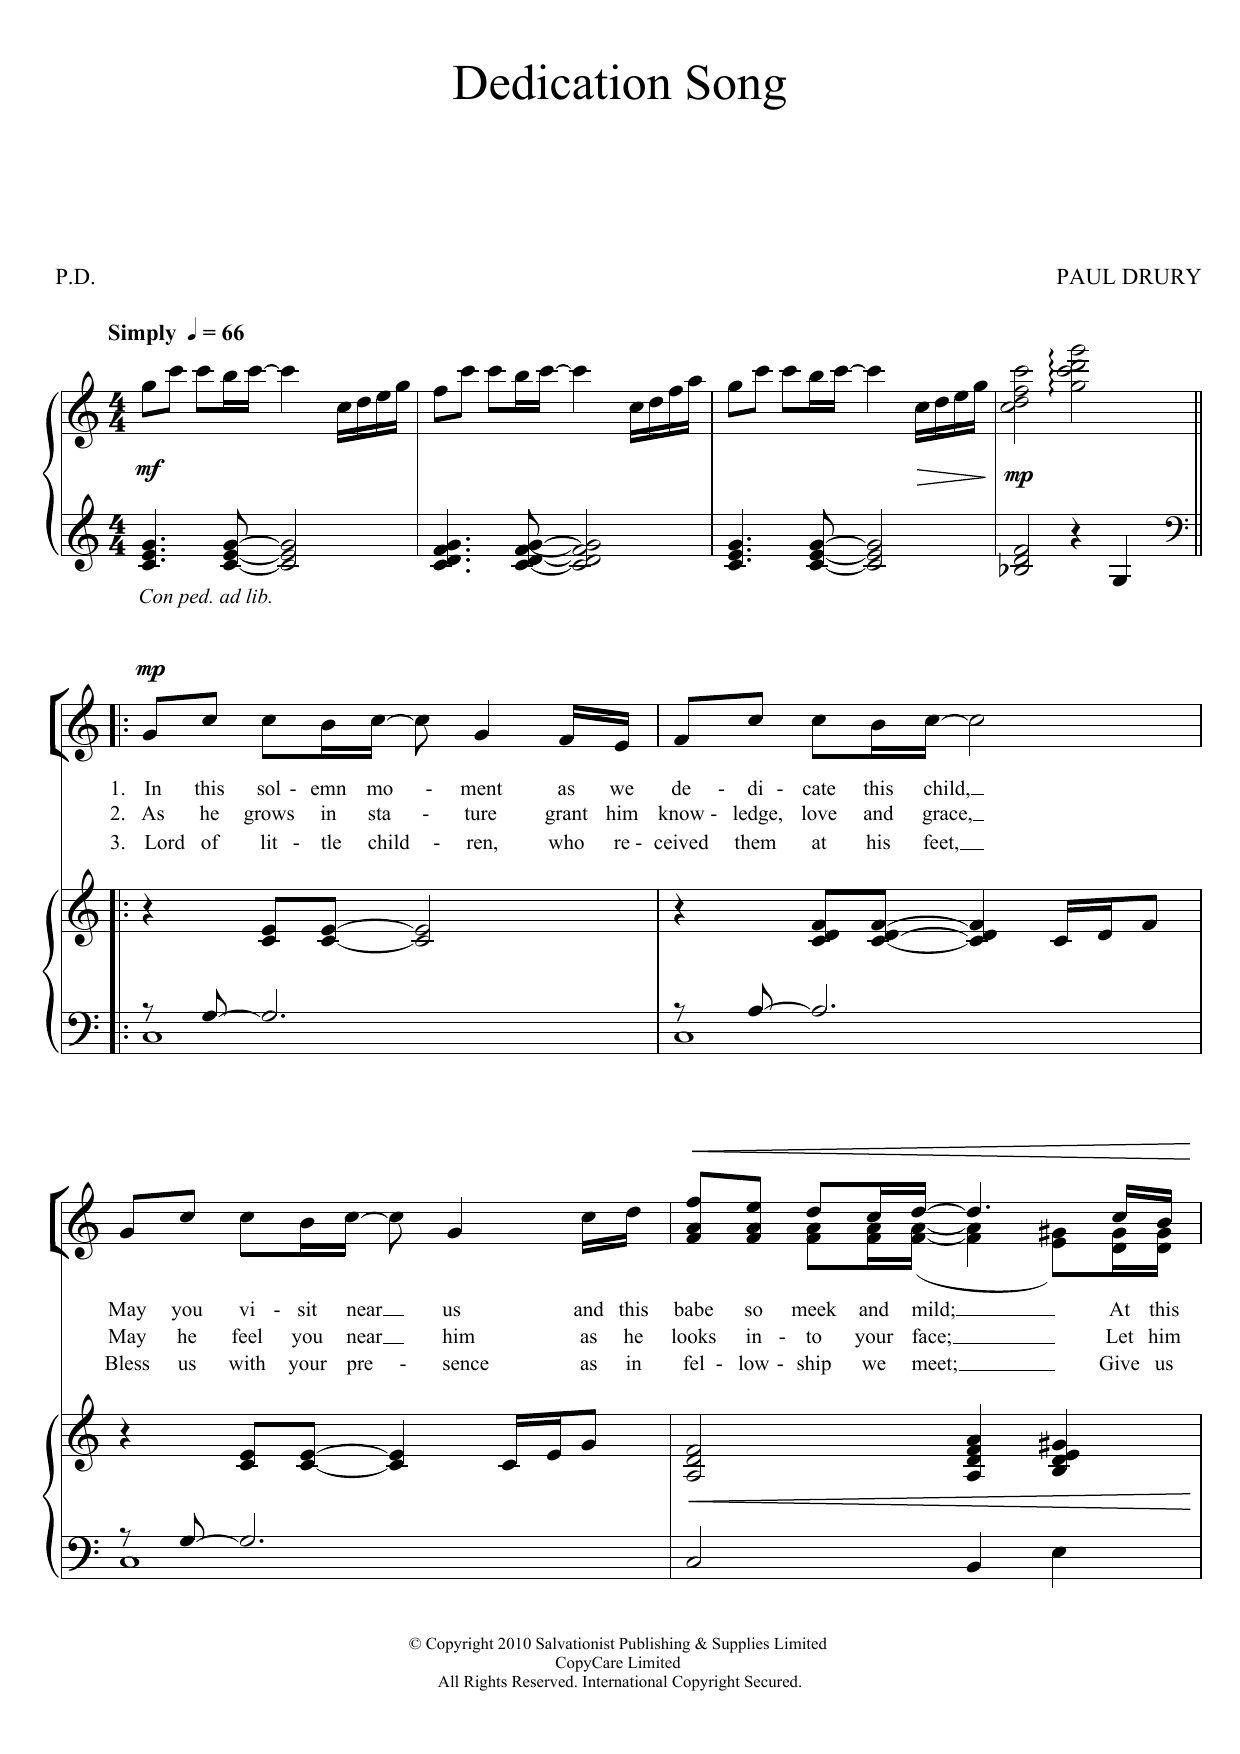 Download The Salvation Army Dedication Song Sheet Music